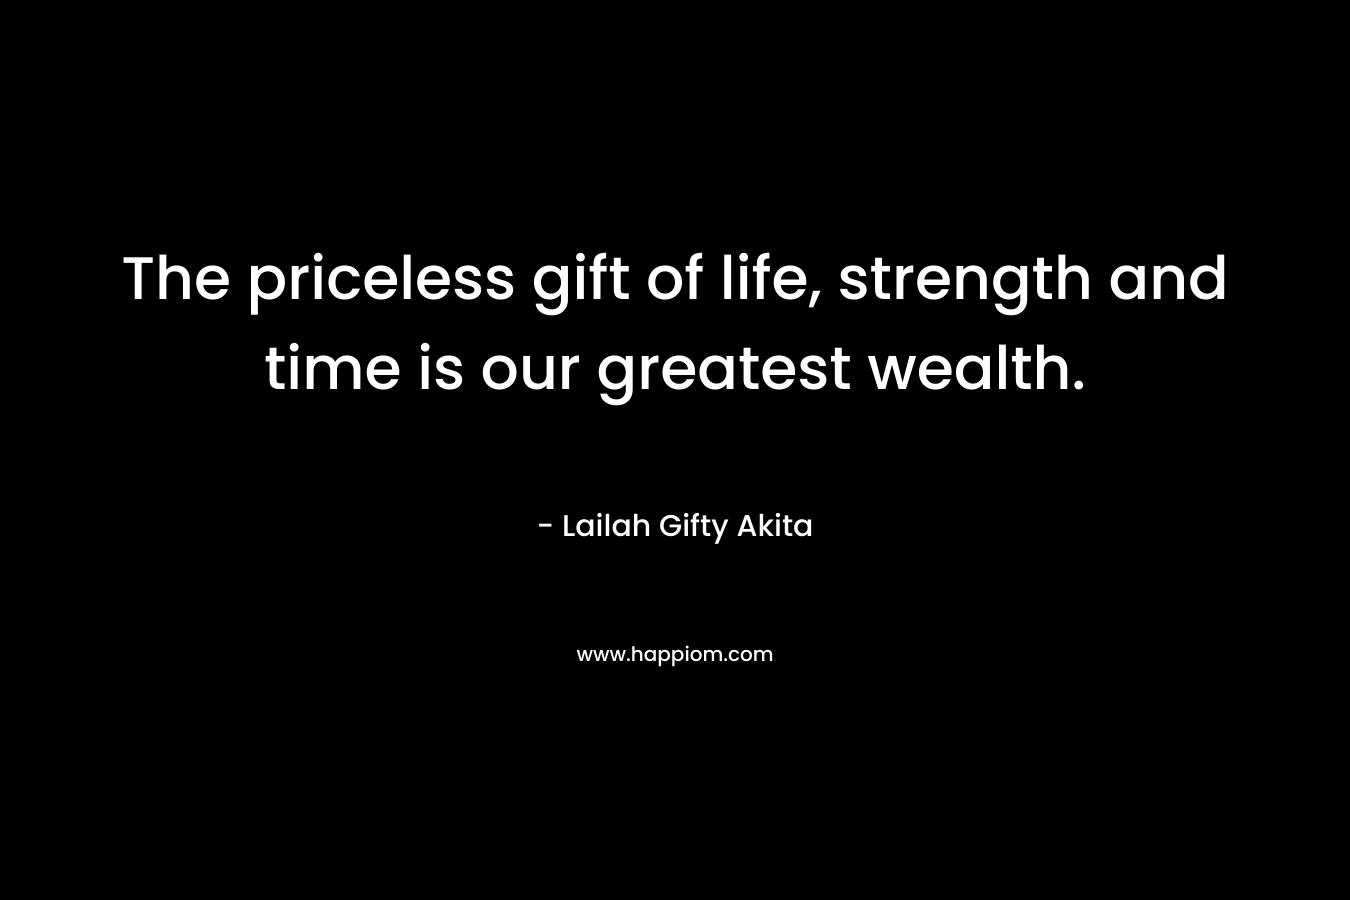 The priceless gift of life, strength and time is our greatest wealth.